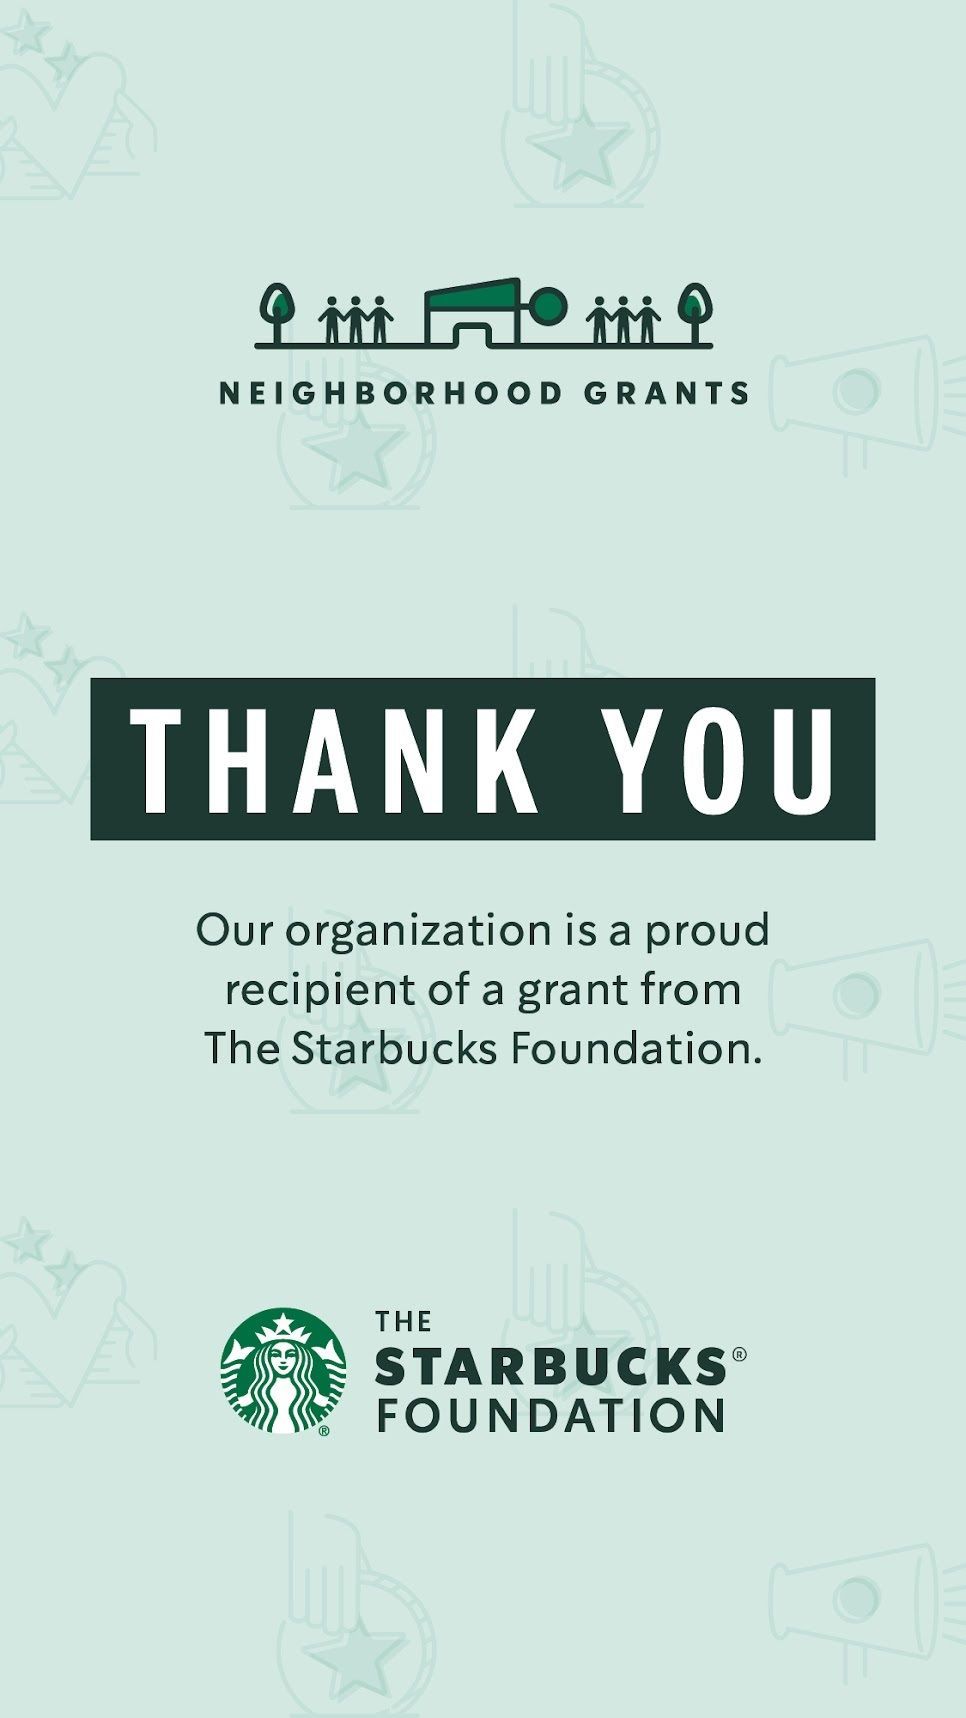 RISE Receives $1,000 Grant from The Starbucks Foundation